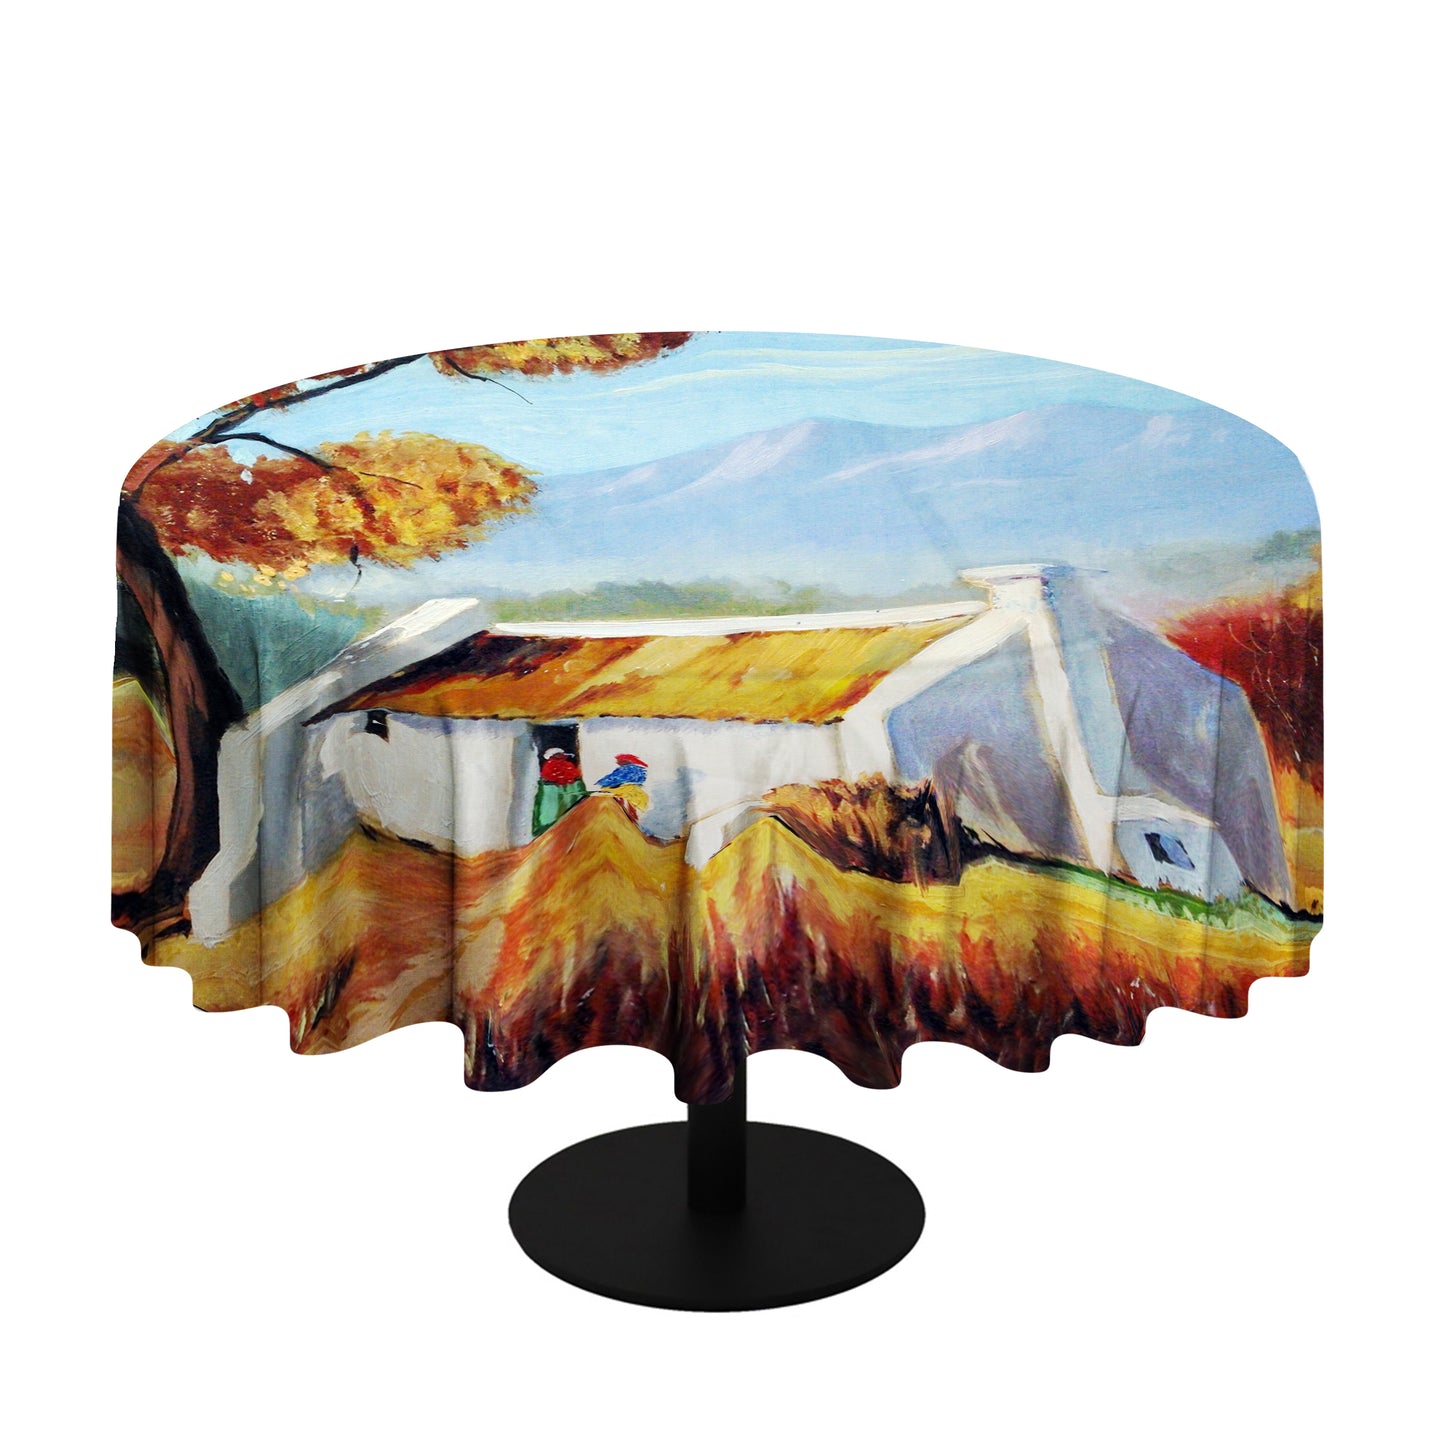 Grass Roof House Round Tablecloth By Marthie Potgieter